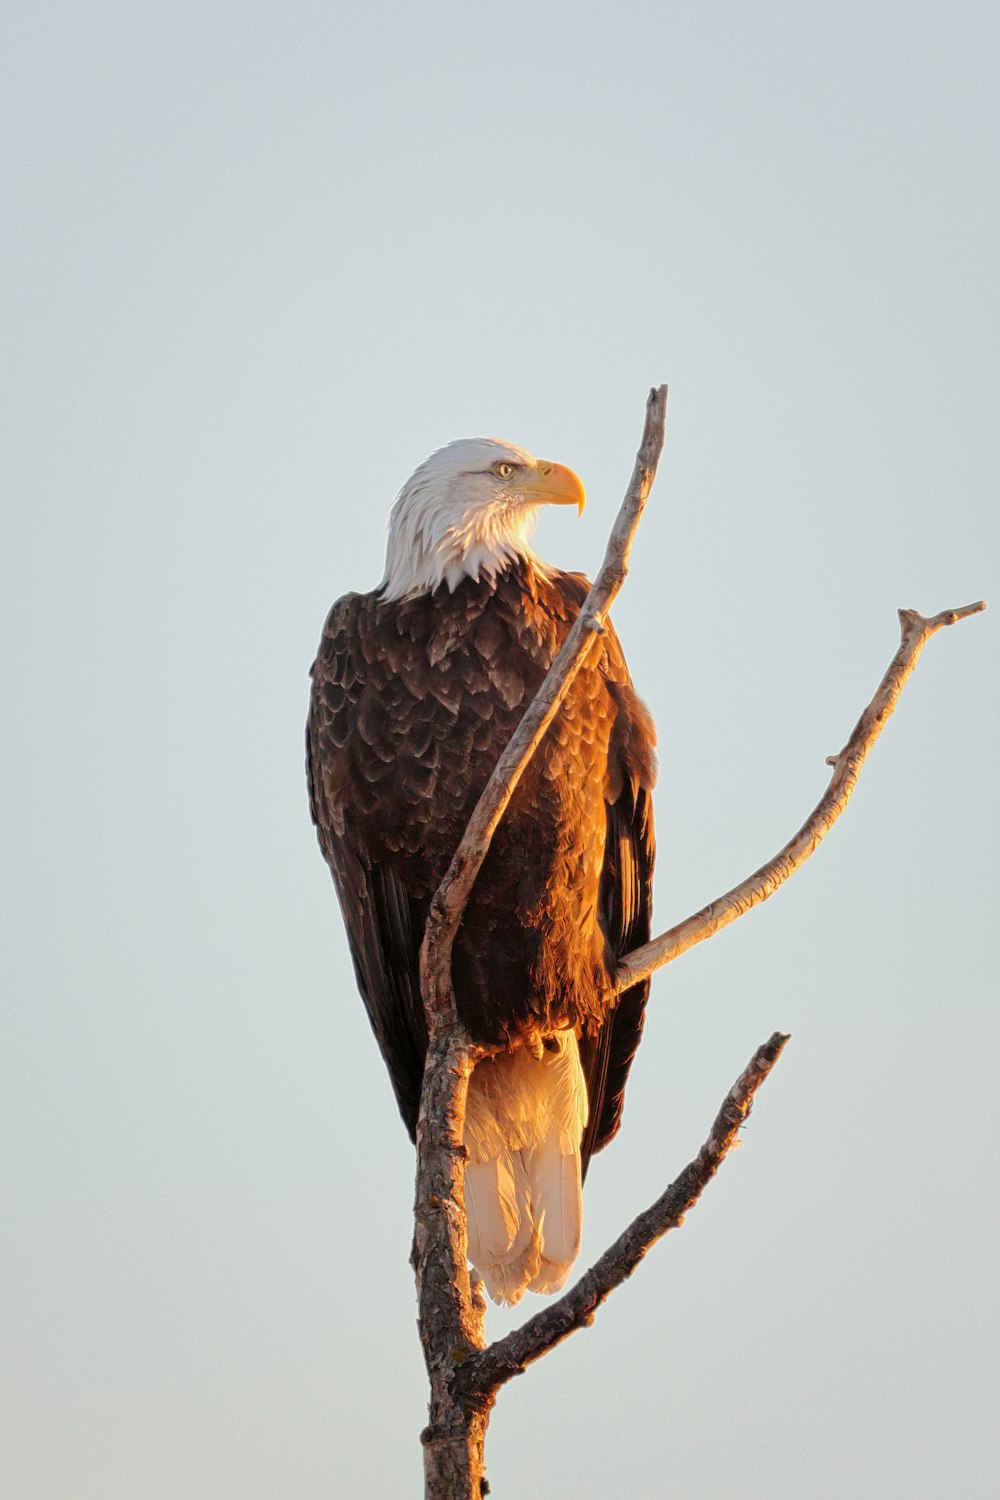 a bald eagle sitting on top of a tree branch